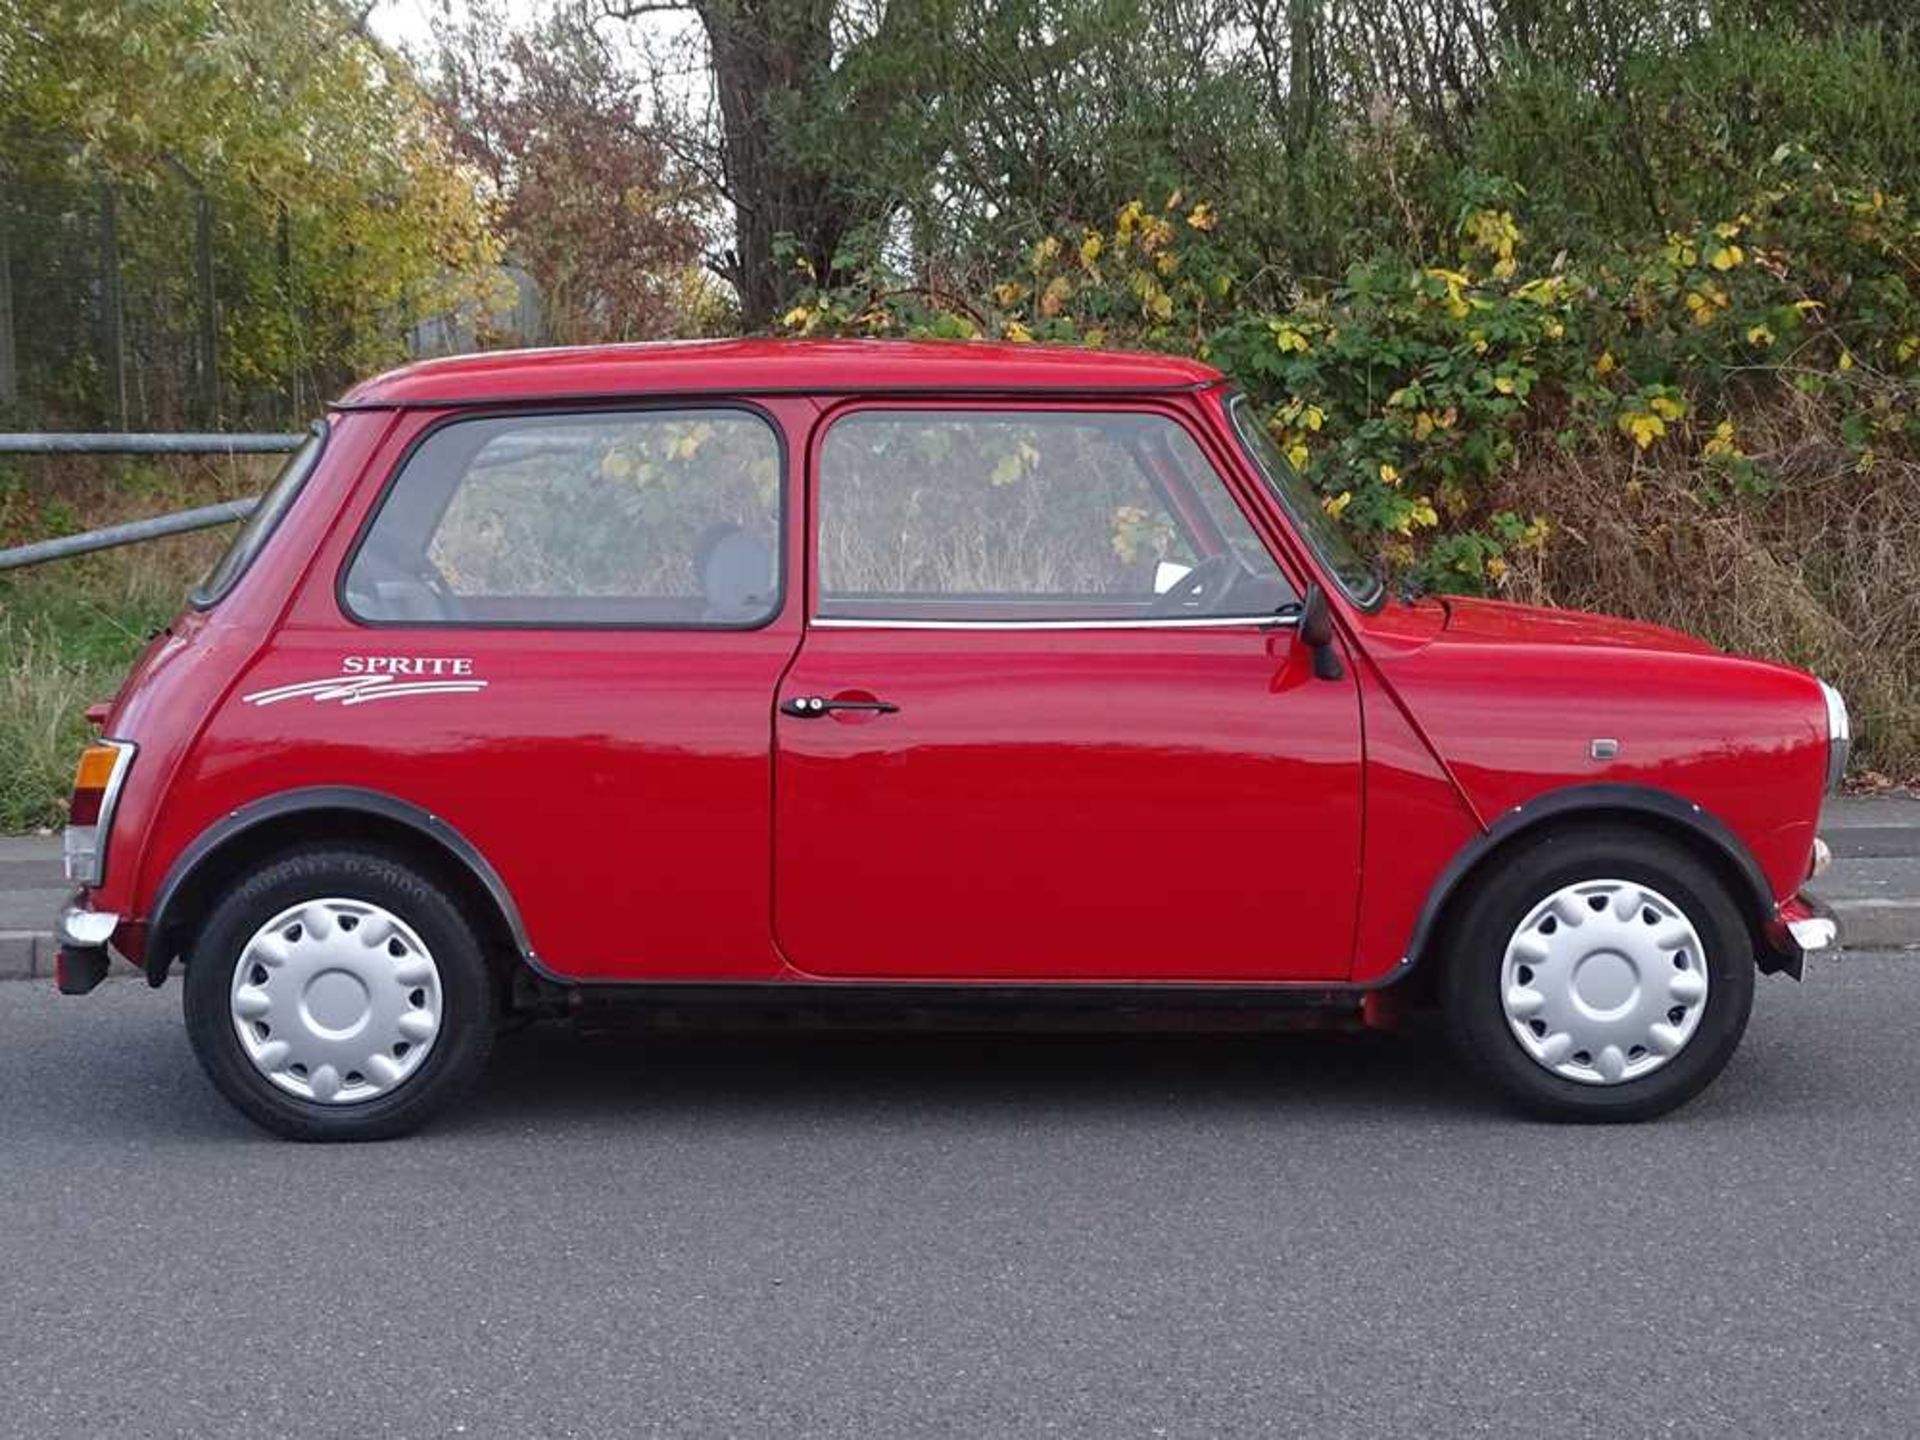 1995 Rover Mini Sprite Only c.22,500 miles from new - Image 10 of 52